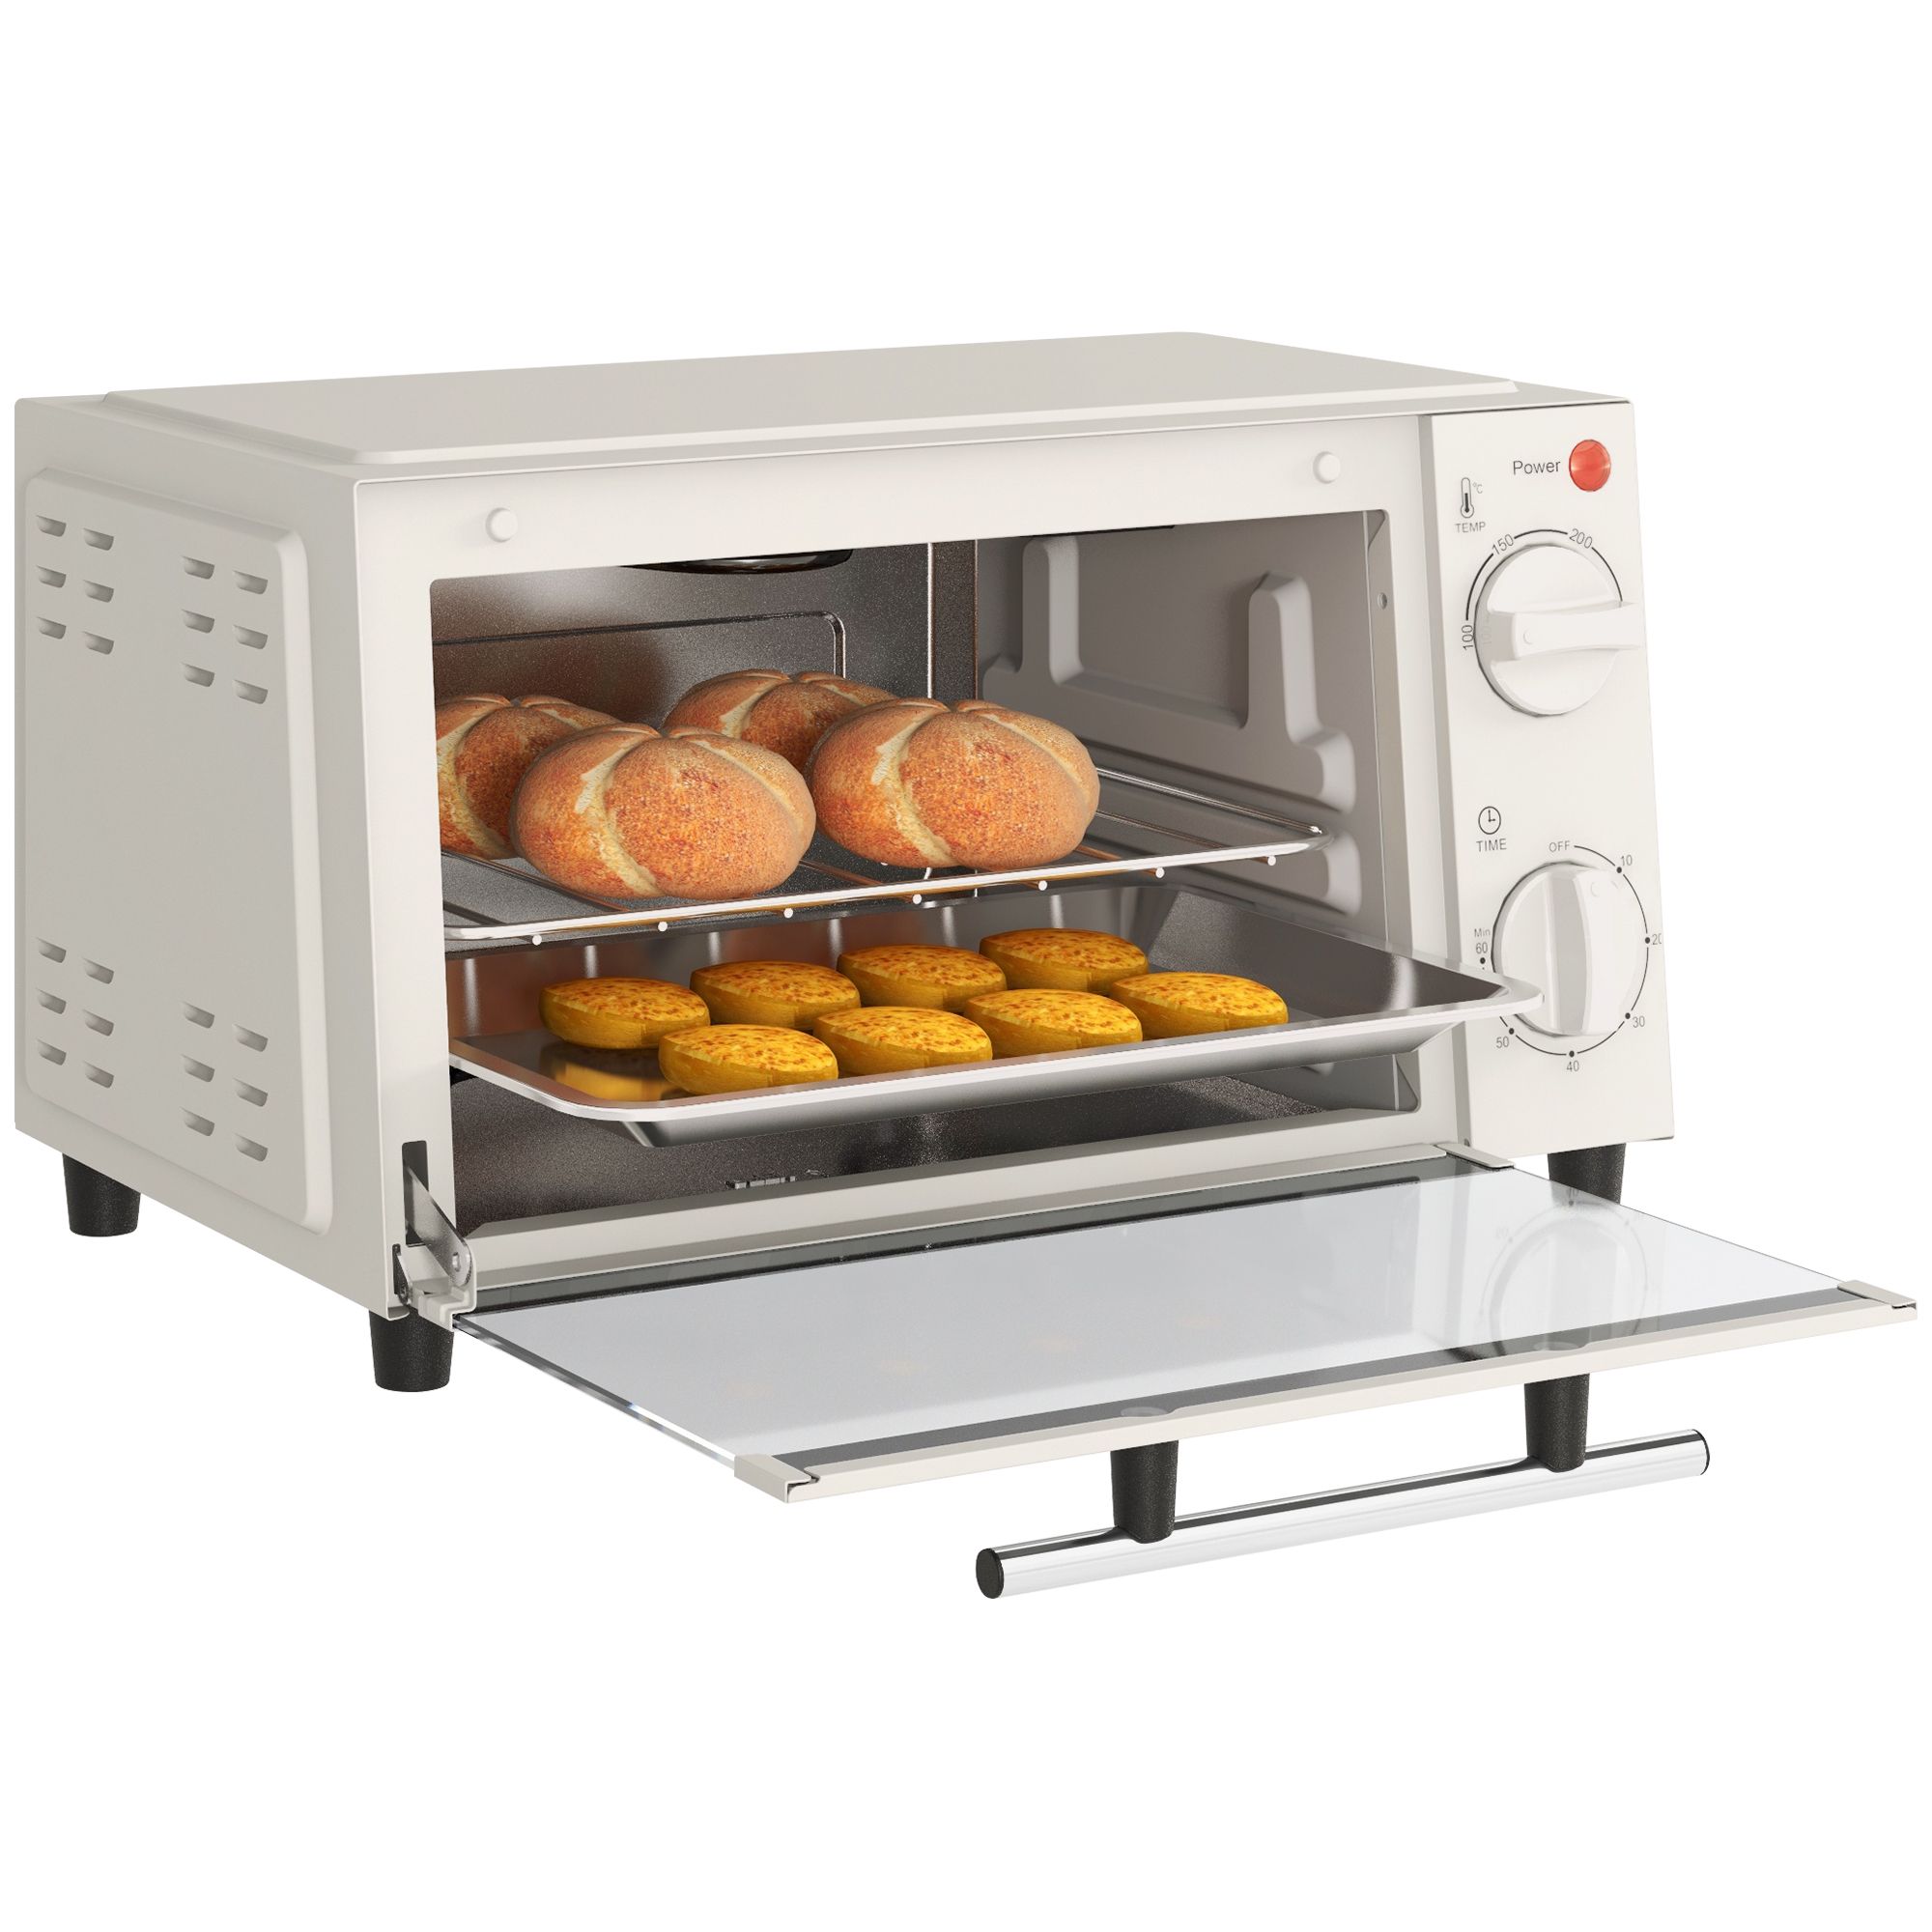 Homcom Mini Oven, 9l Countertop Electric Grill, Toaster Oven With Adjustable Temperature, Timer, Baking Tray And Wire Rack, 750w, Cream